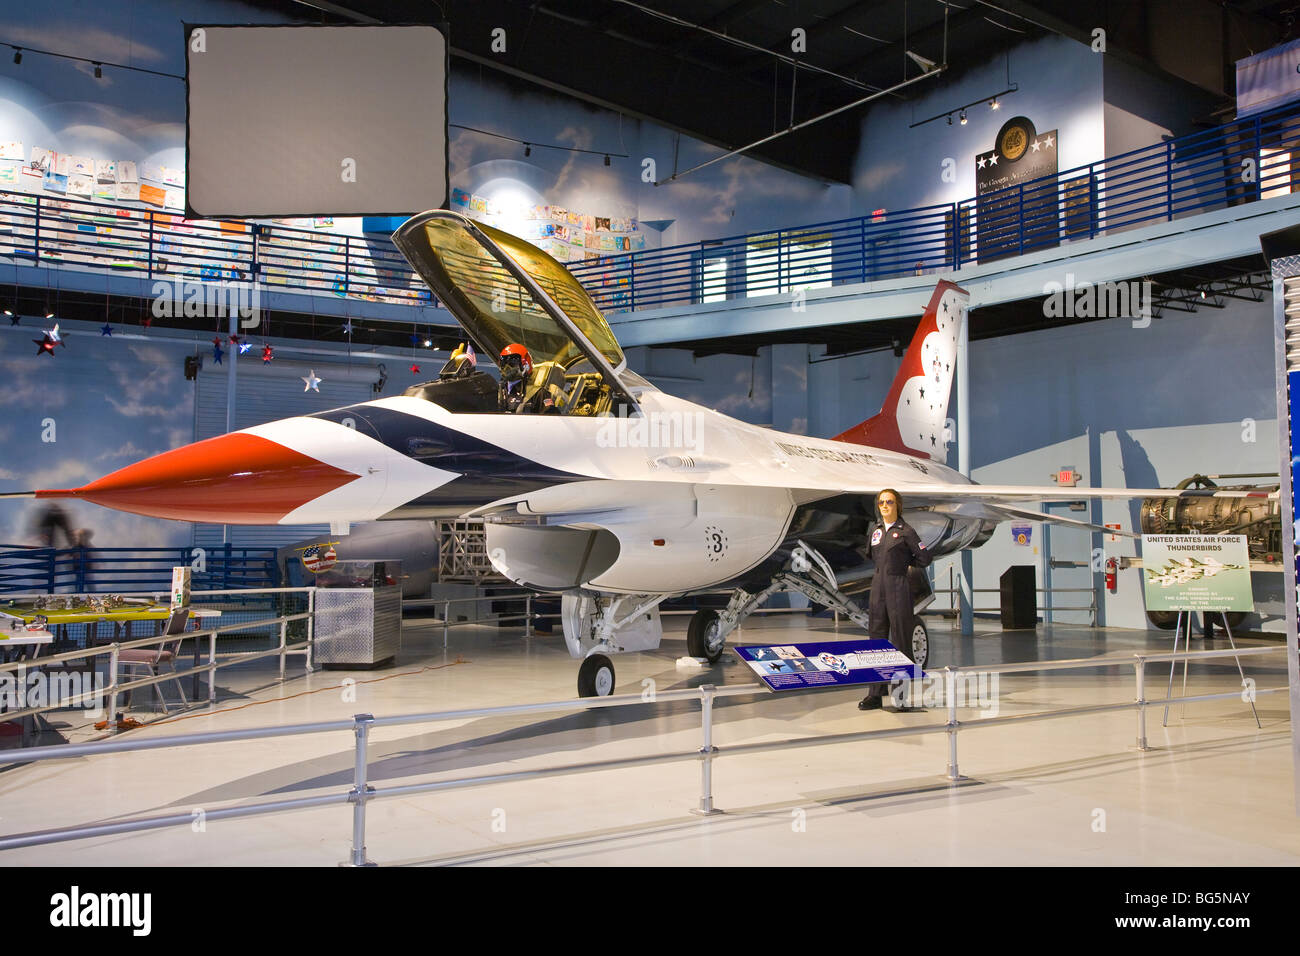 Museum of Aviation at Robins Air Force Base in Warner Robins Georgia Stock Photo